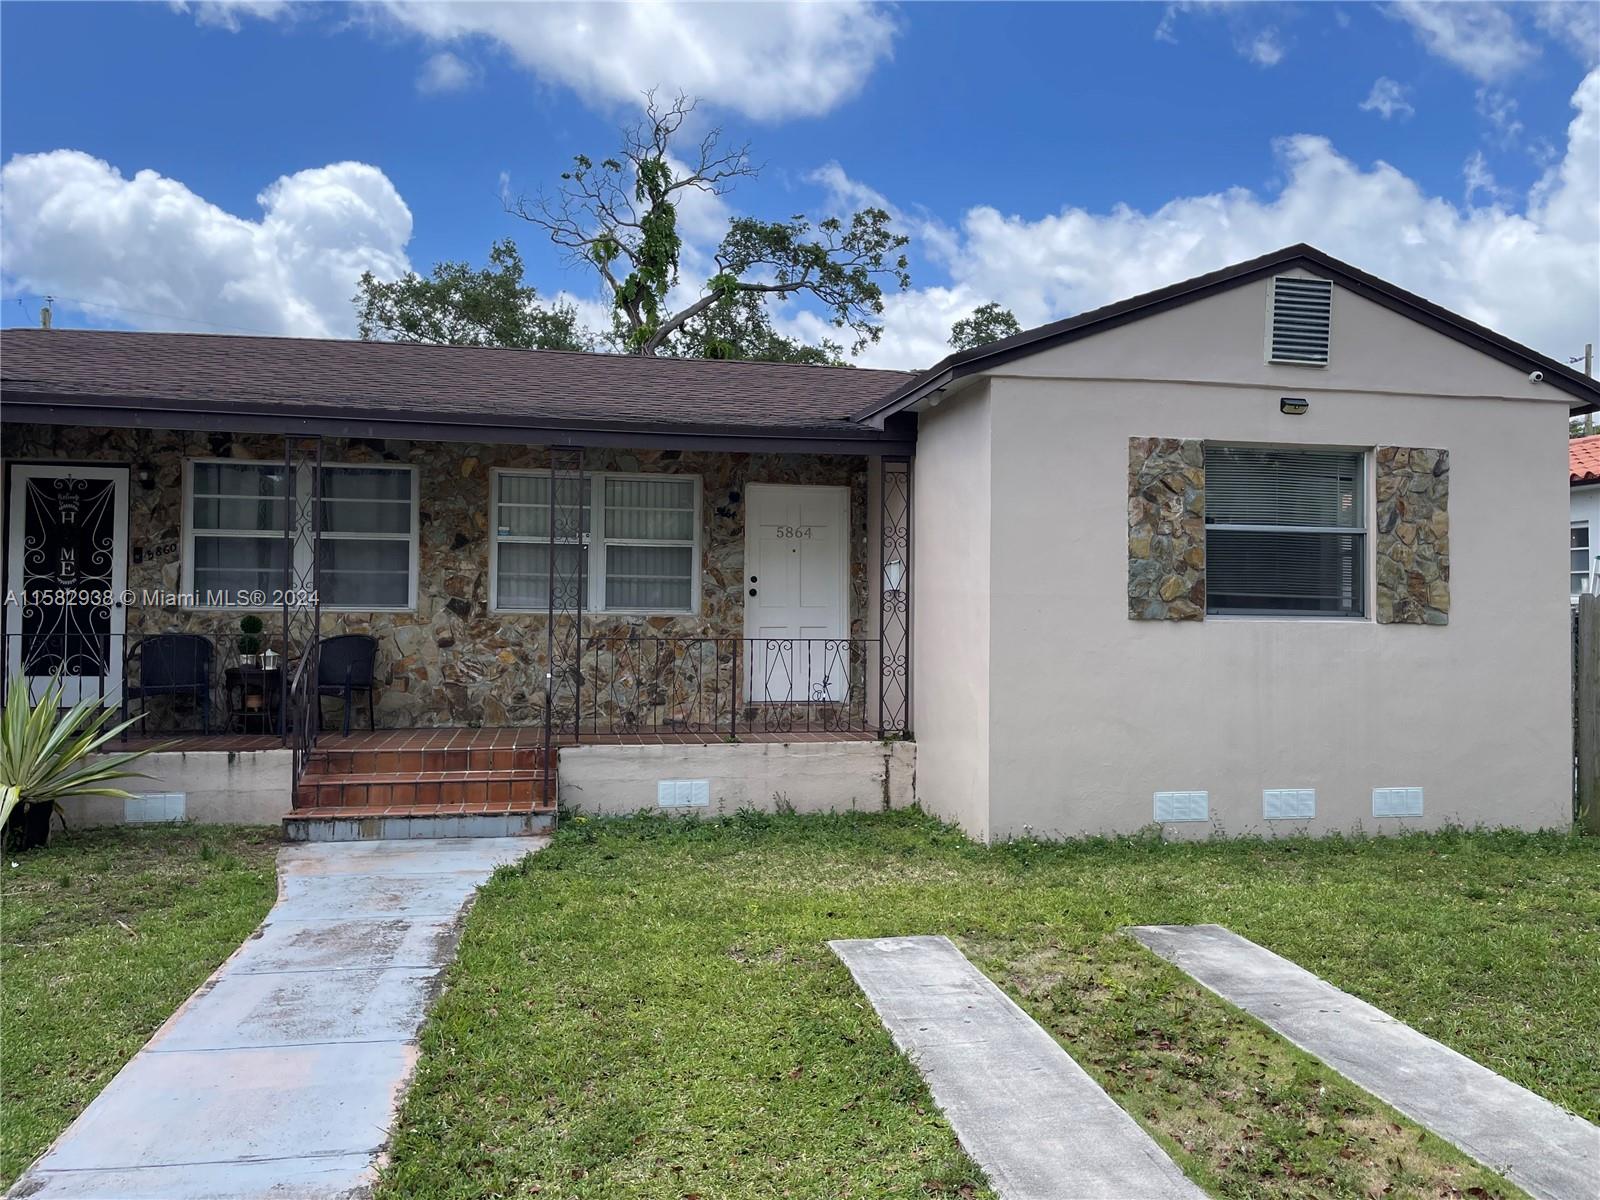 5864 Sw 9th St St 5864, West Miami, Miami-Dade County, Florida - 2 Bedrooms  
1 Bathrooms - 